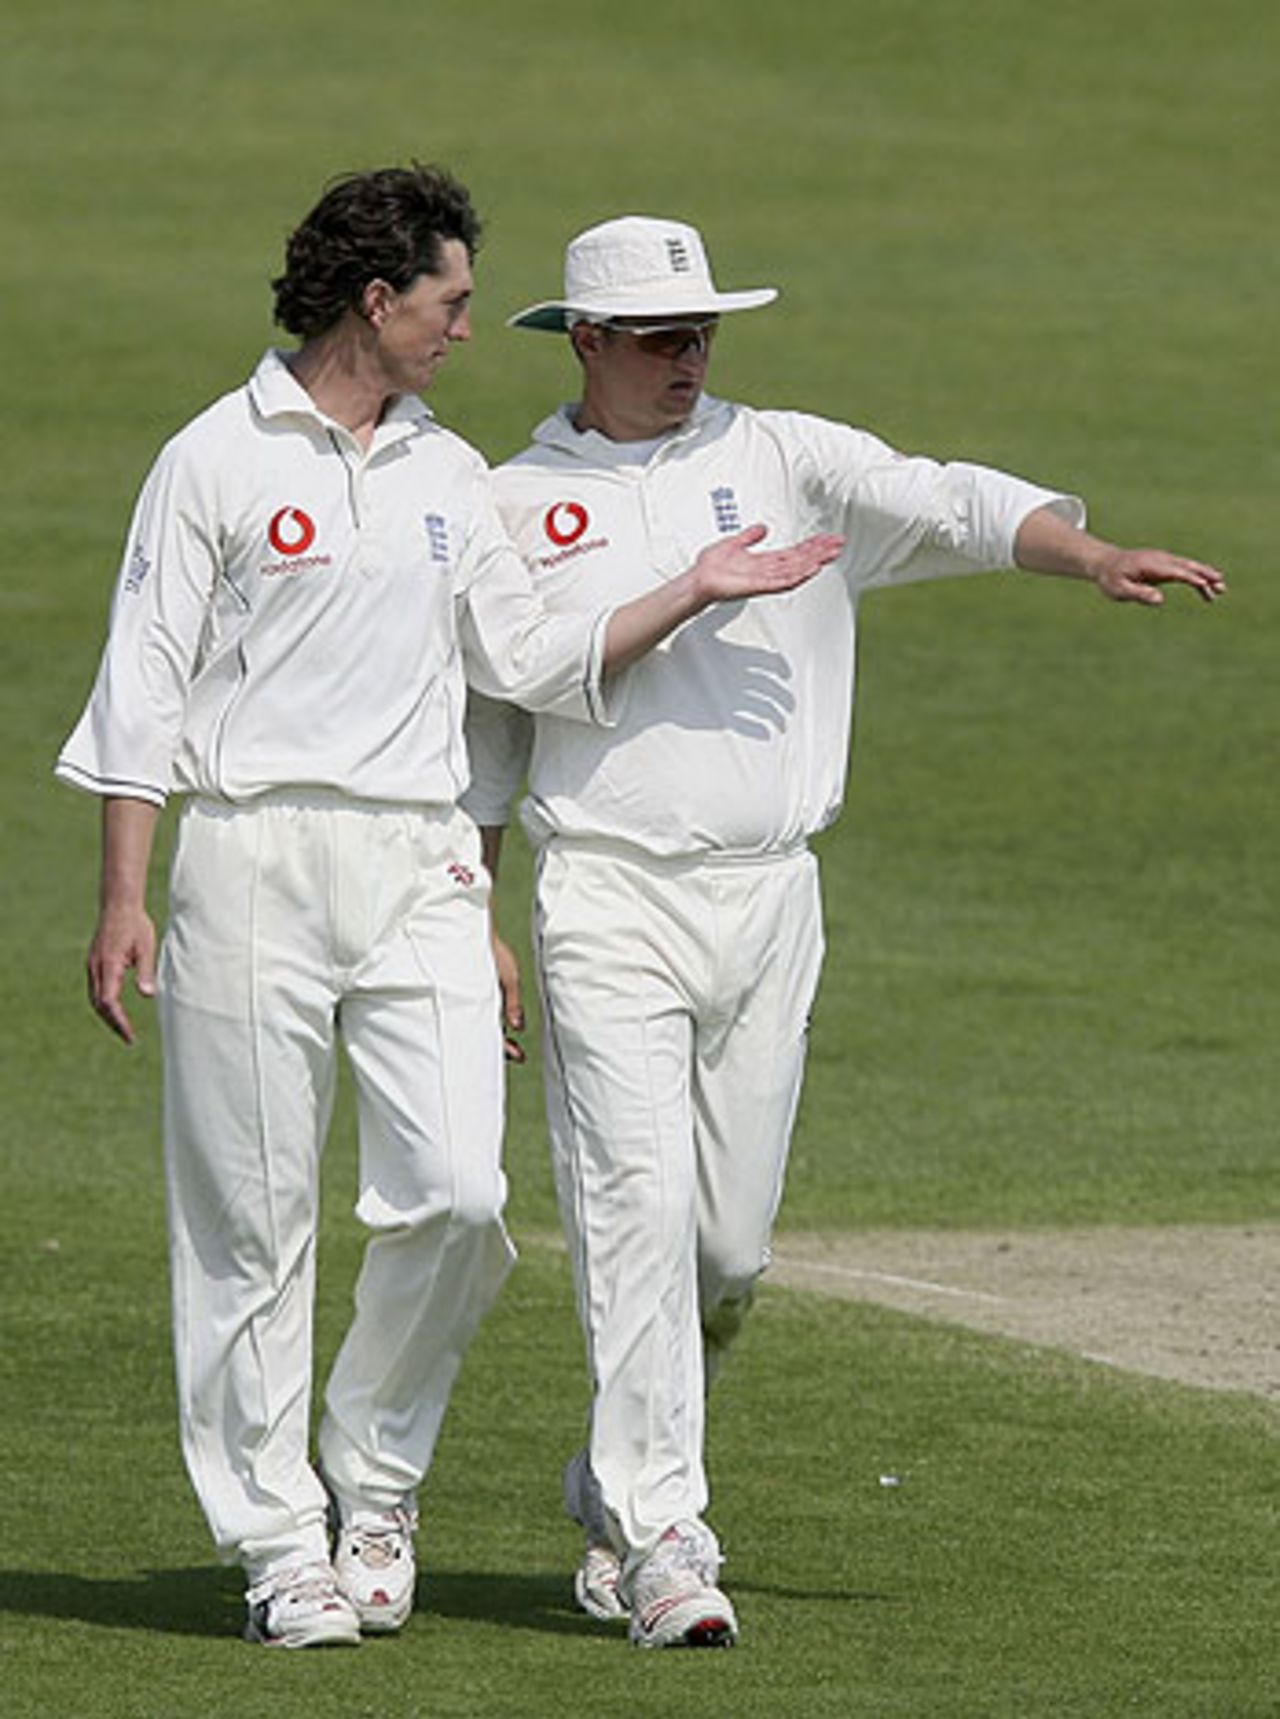 Jon Lewis and Robert Key plot their next move, as England A take on the Sri Lankans, Worcester, May 4, 2006